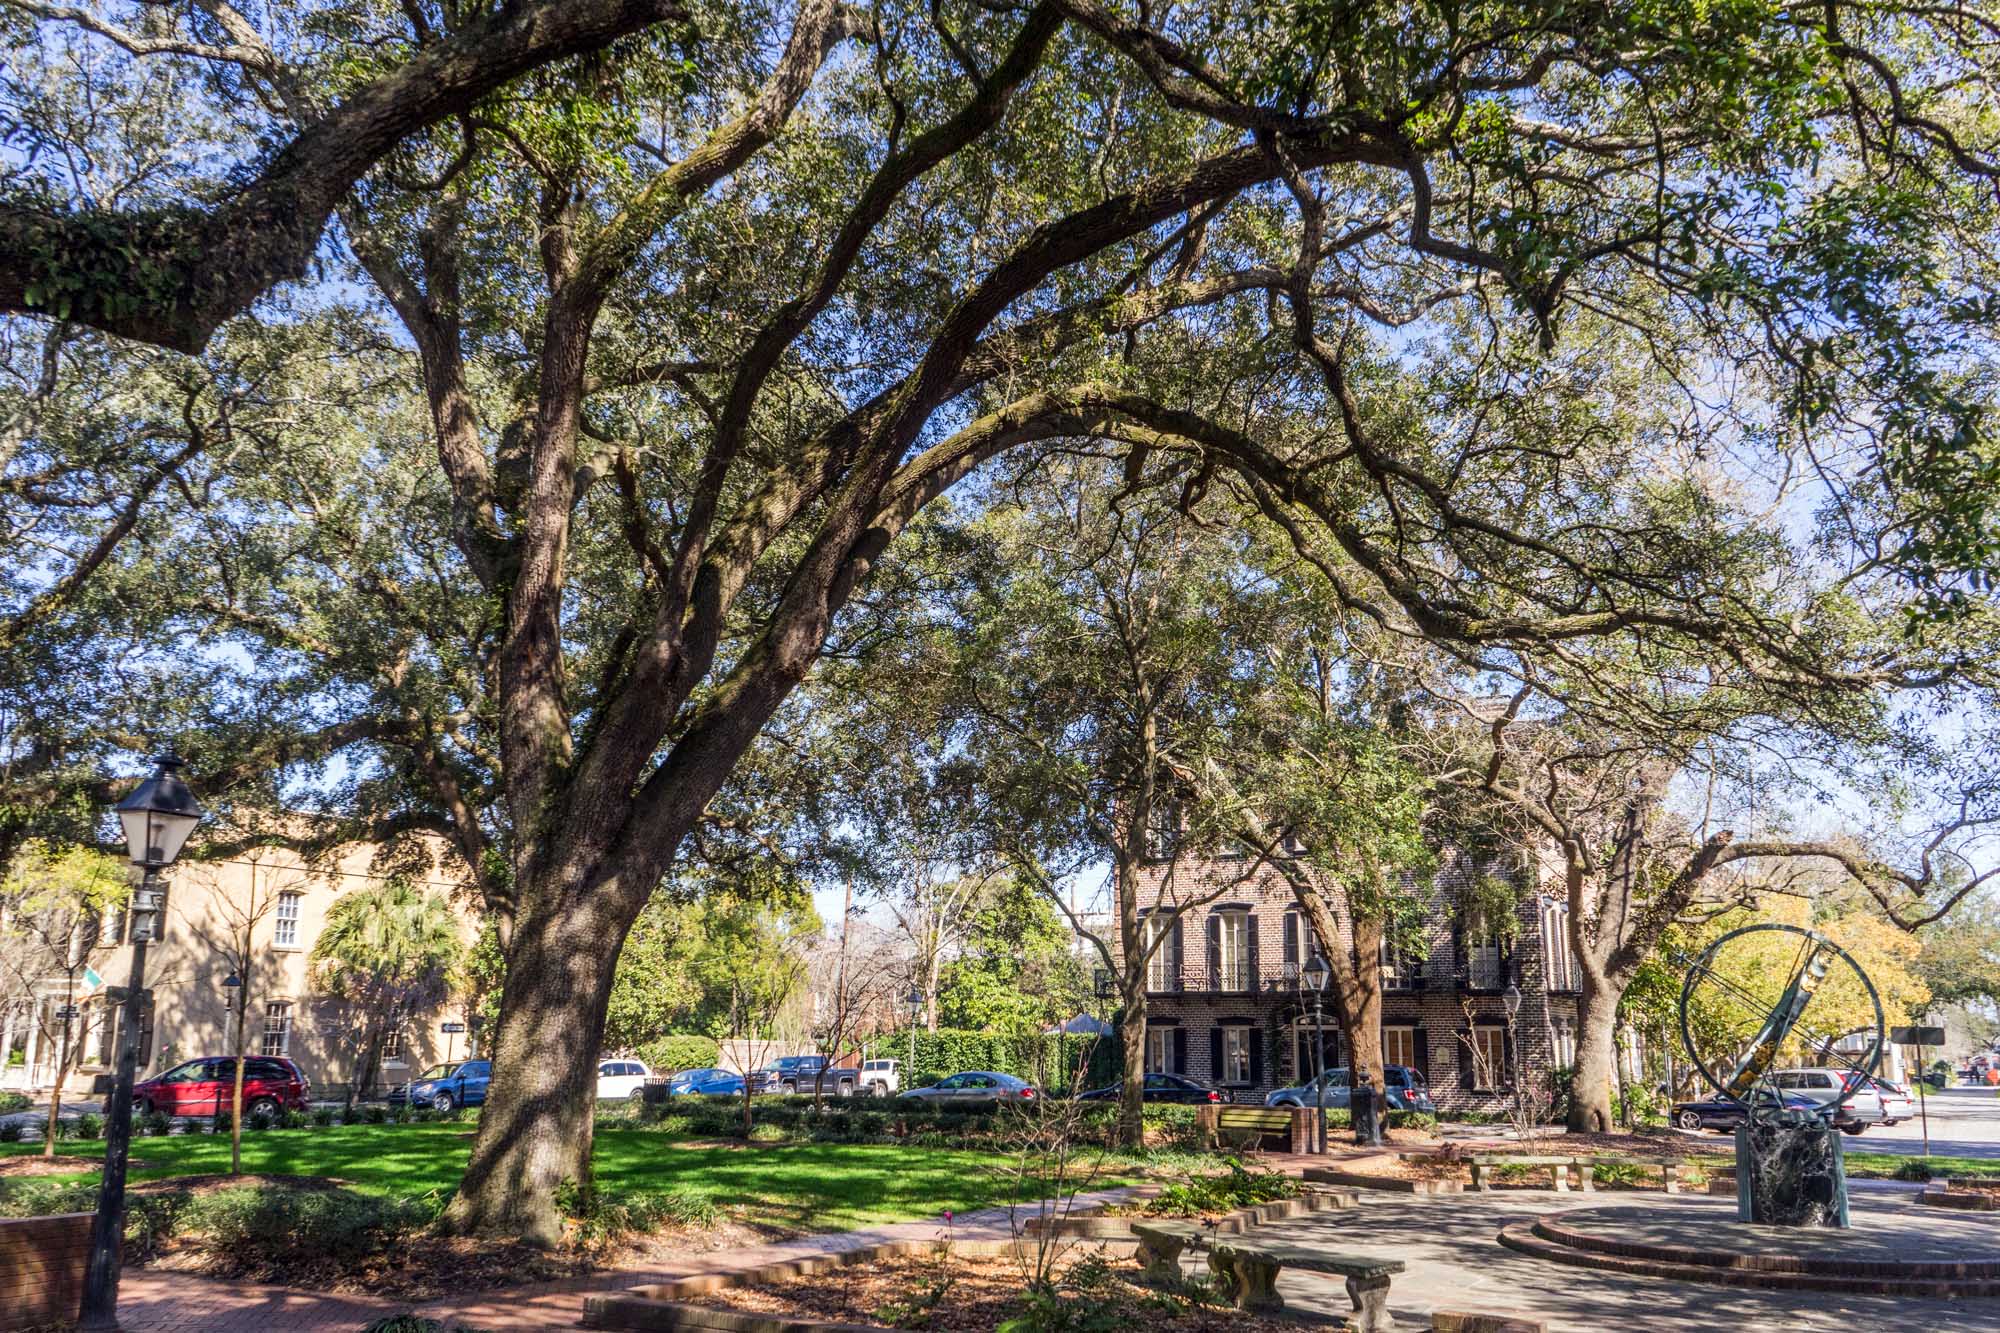 Troup Square in Savannah with trees